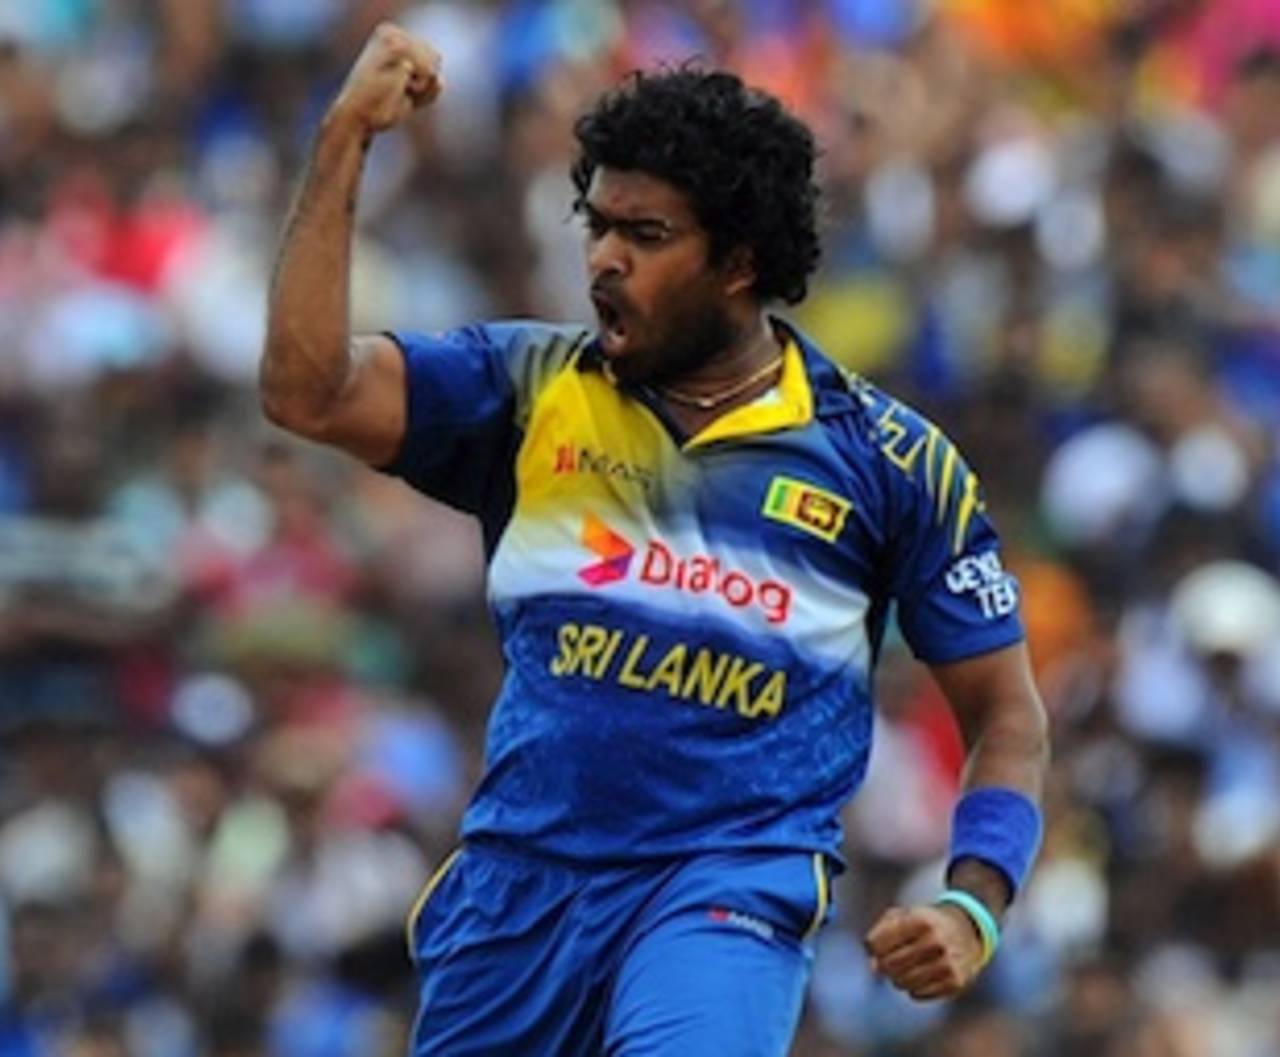 Malinga had been lower on pace than usual against Pakistan and South Africa&nbsp;&nbsp;&bull;&nbsp;&nbsp;AFP